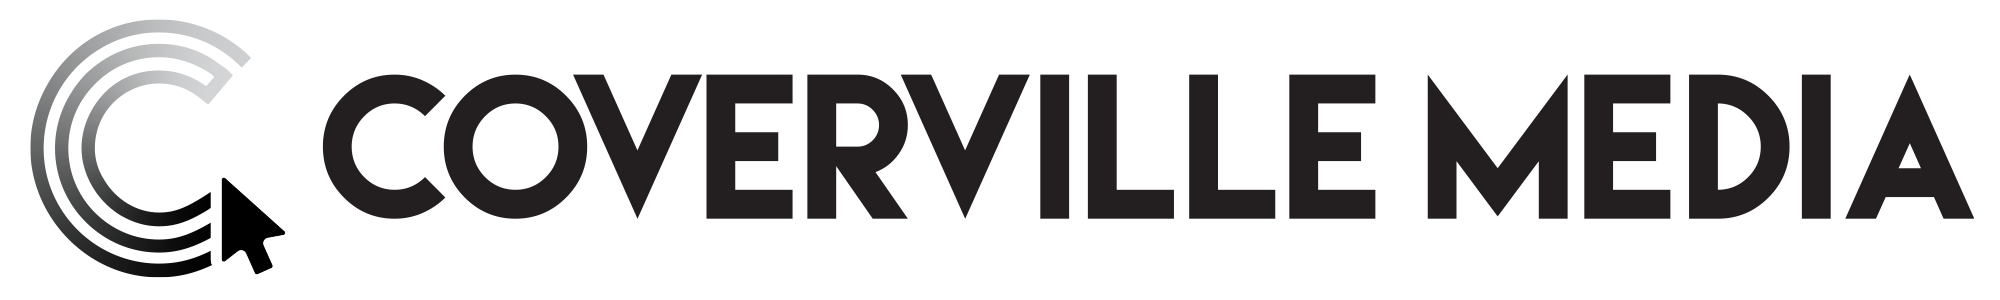 Coverville Media